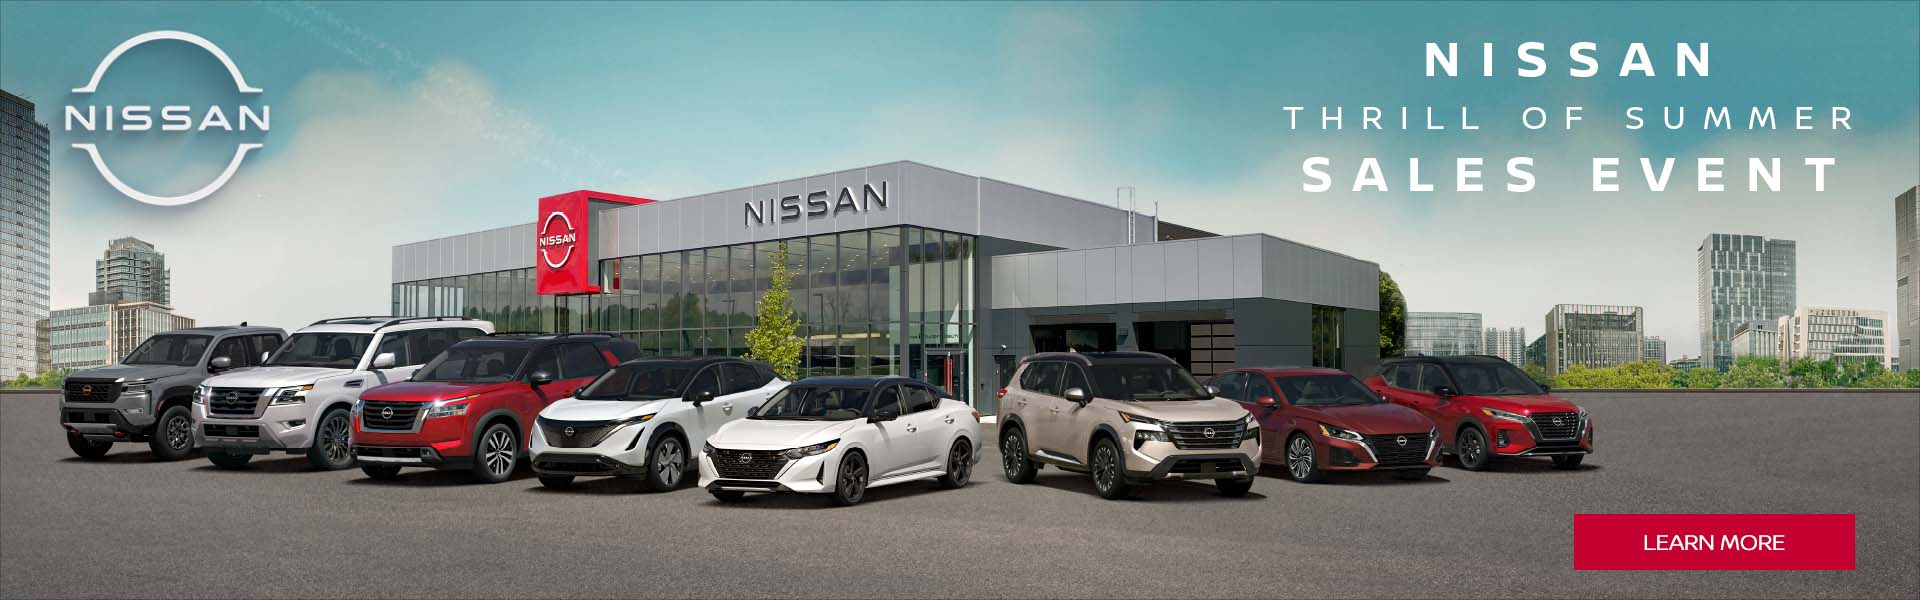 Nissan thrill of the summer sales event